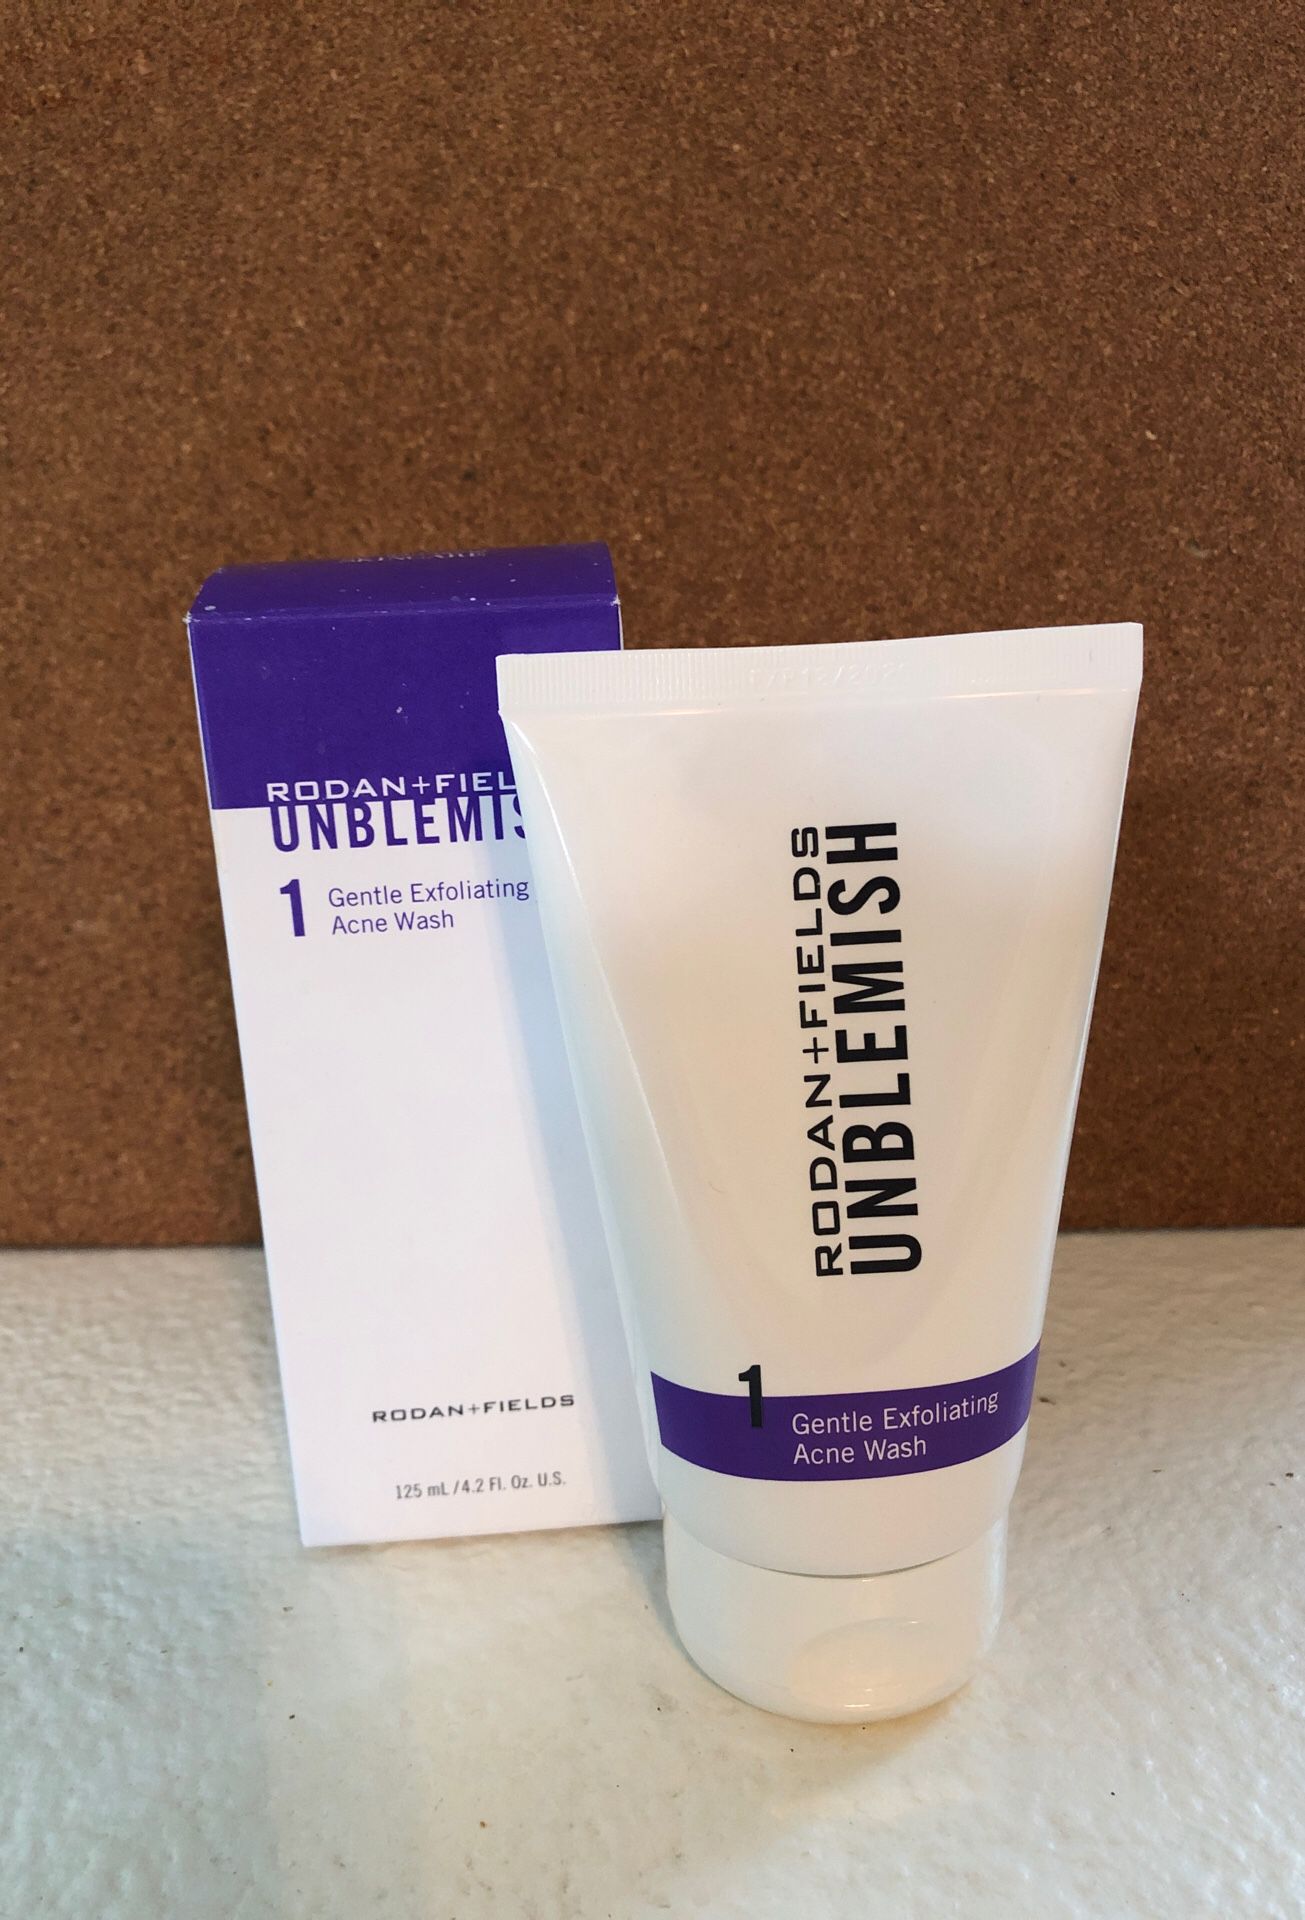 Rodan and Fields Unblemished gentle exfoliating acne wash